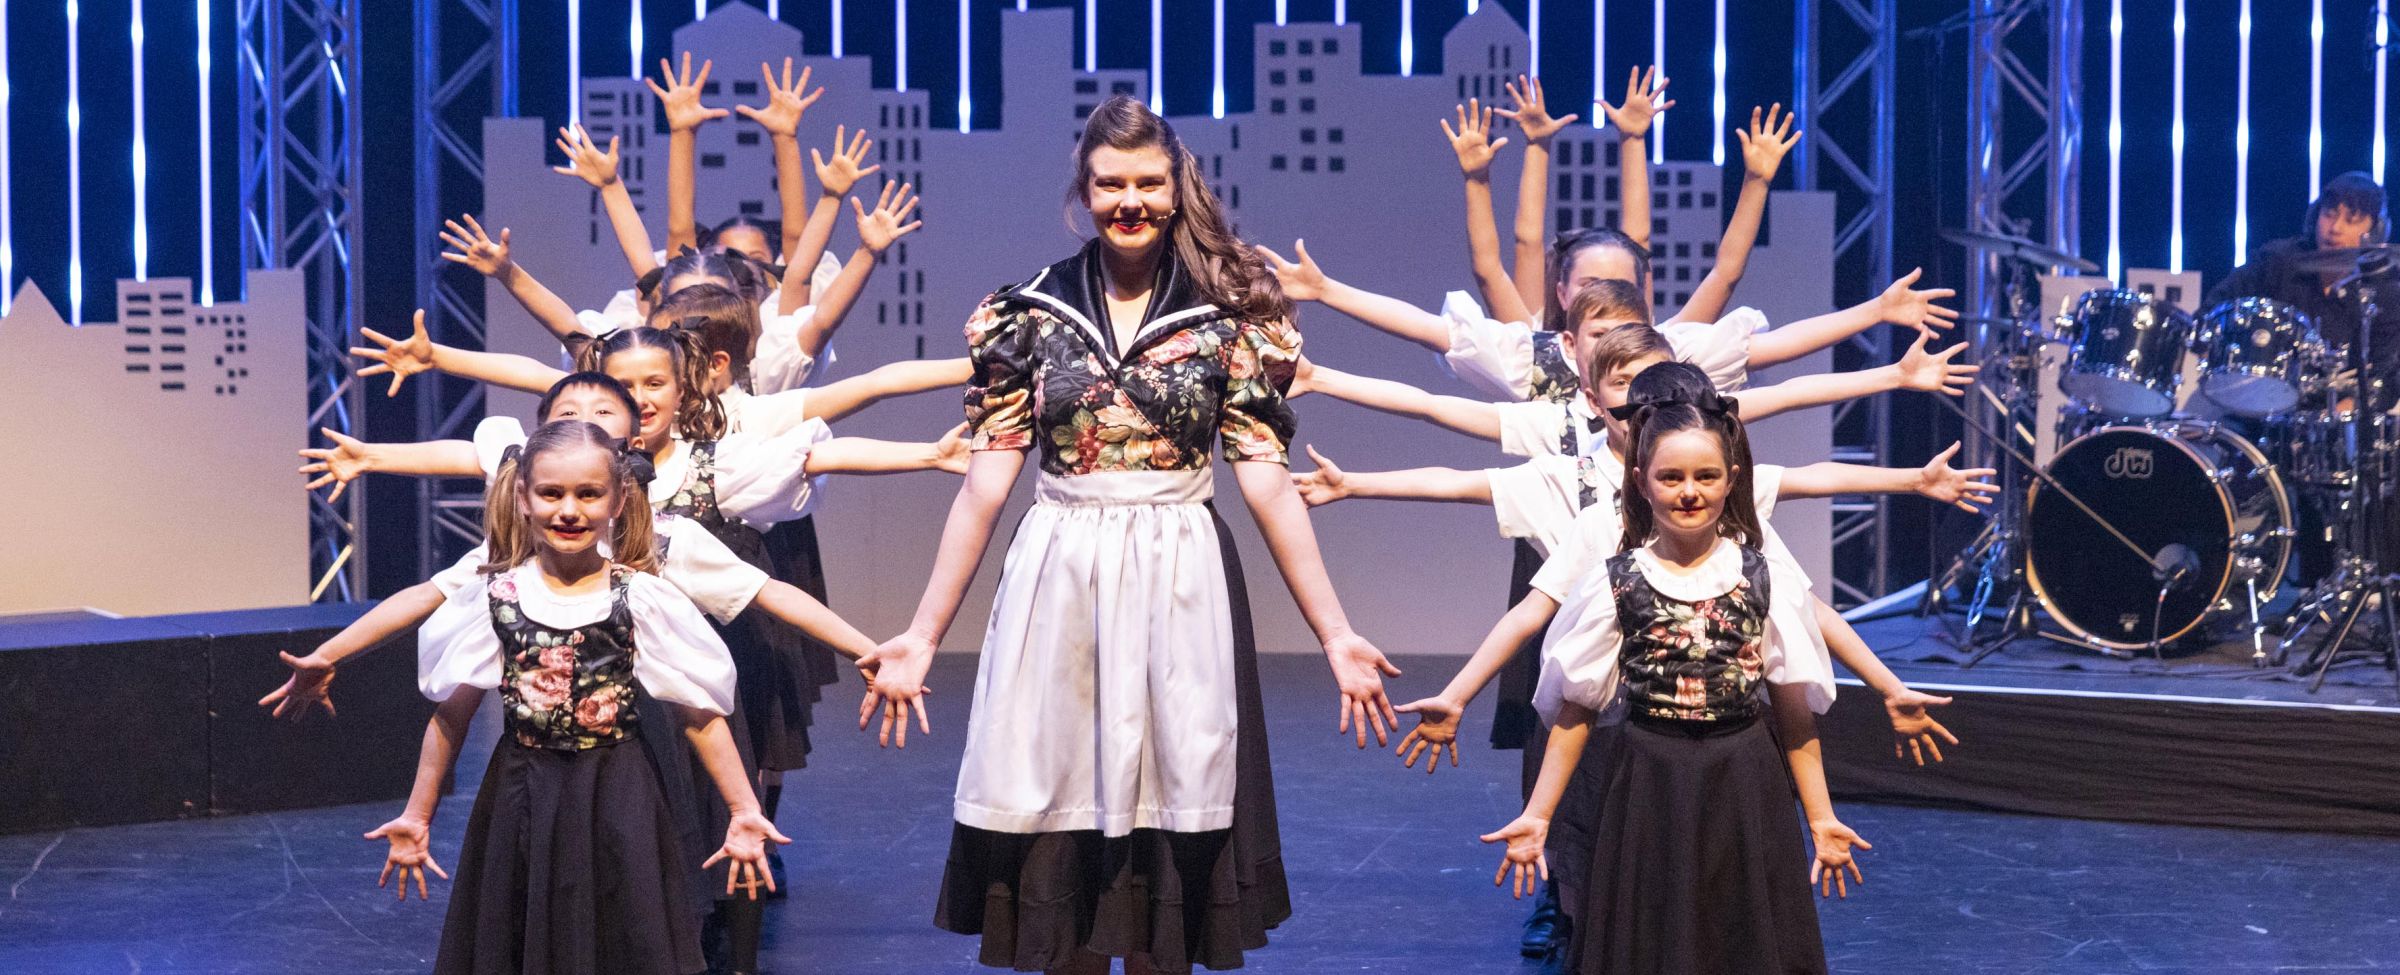 Students performing Sound of Music item on stage